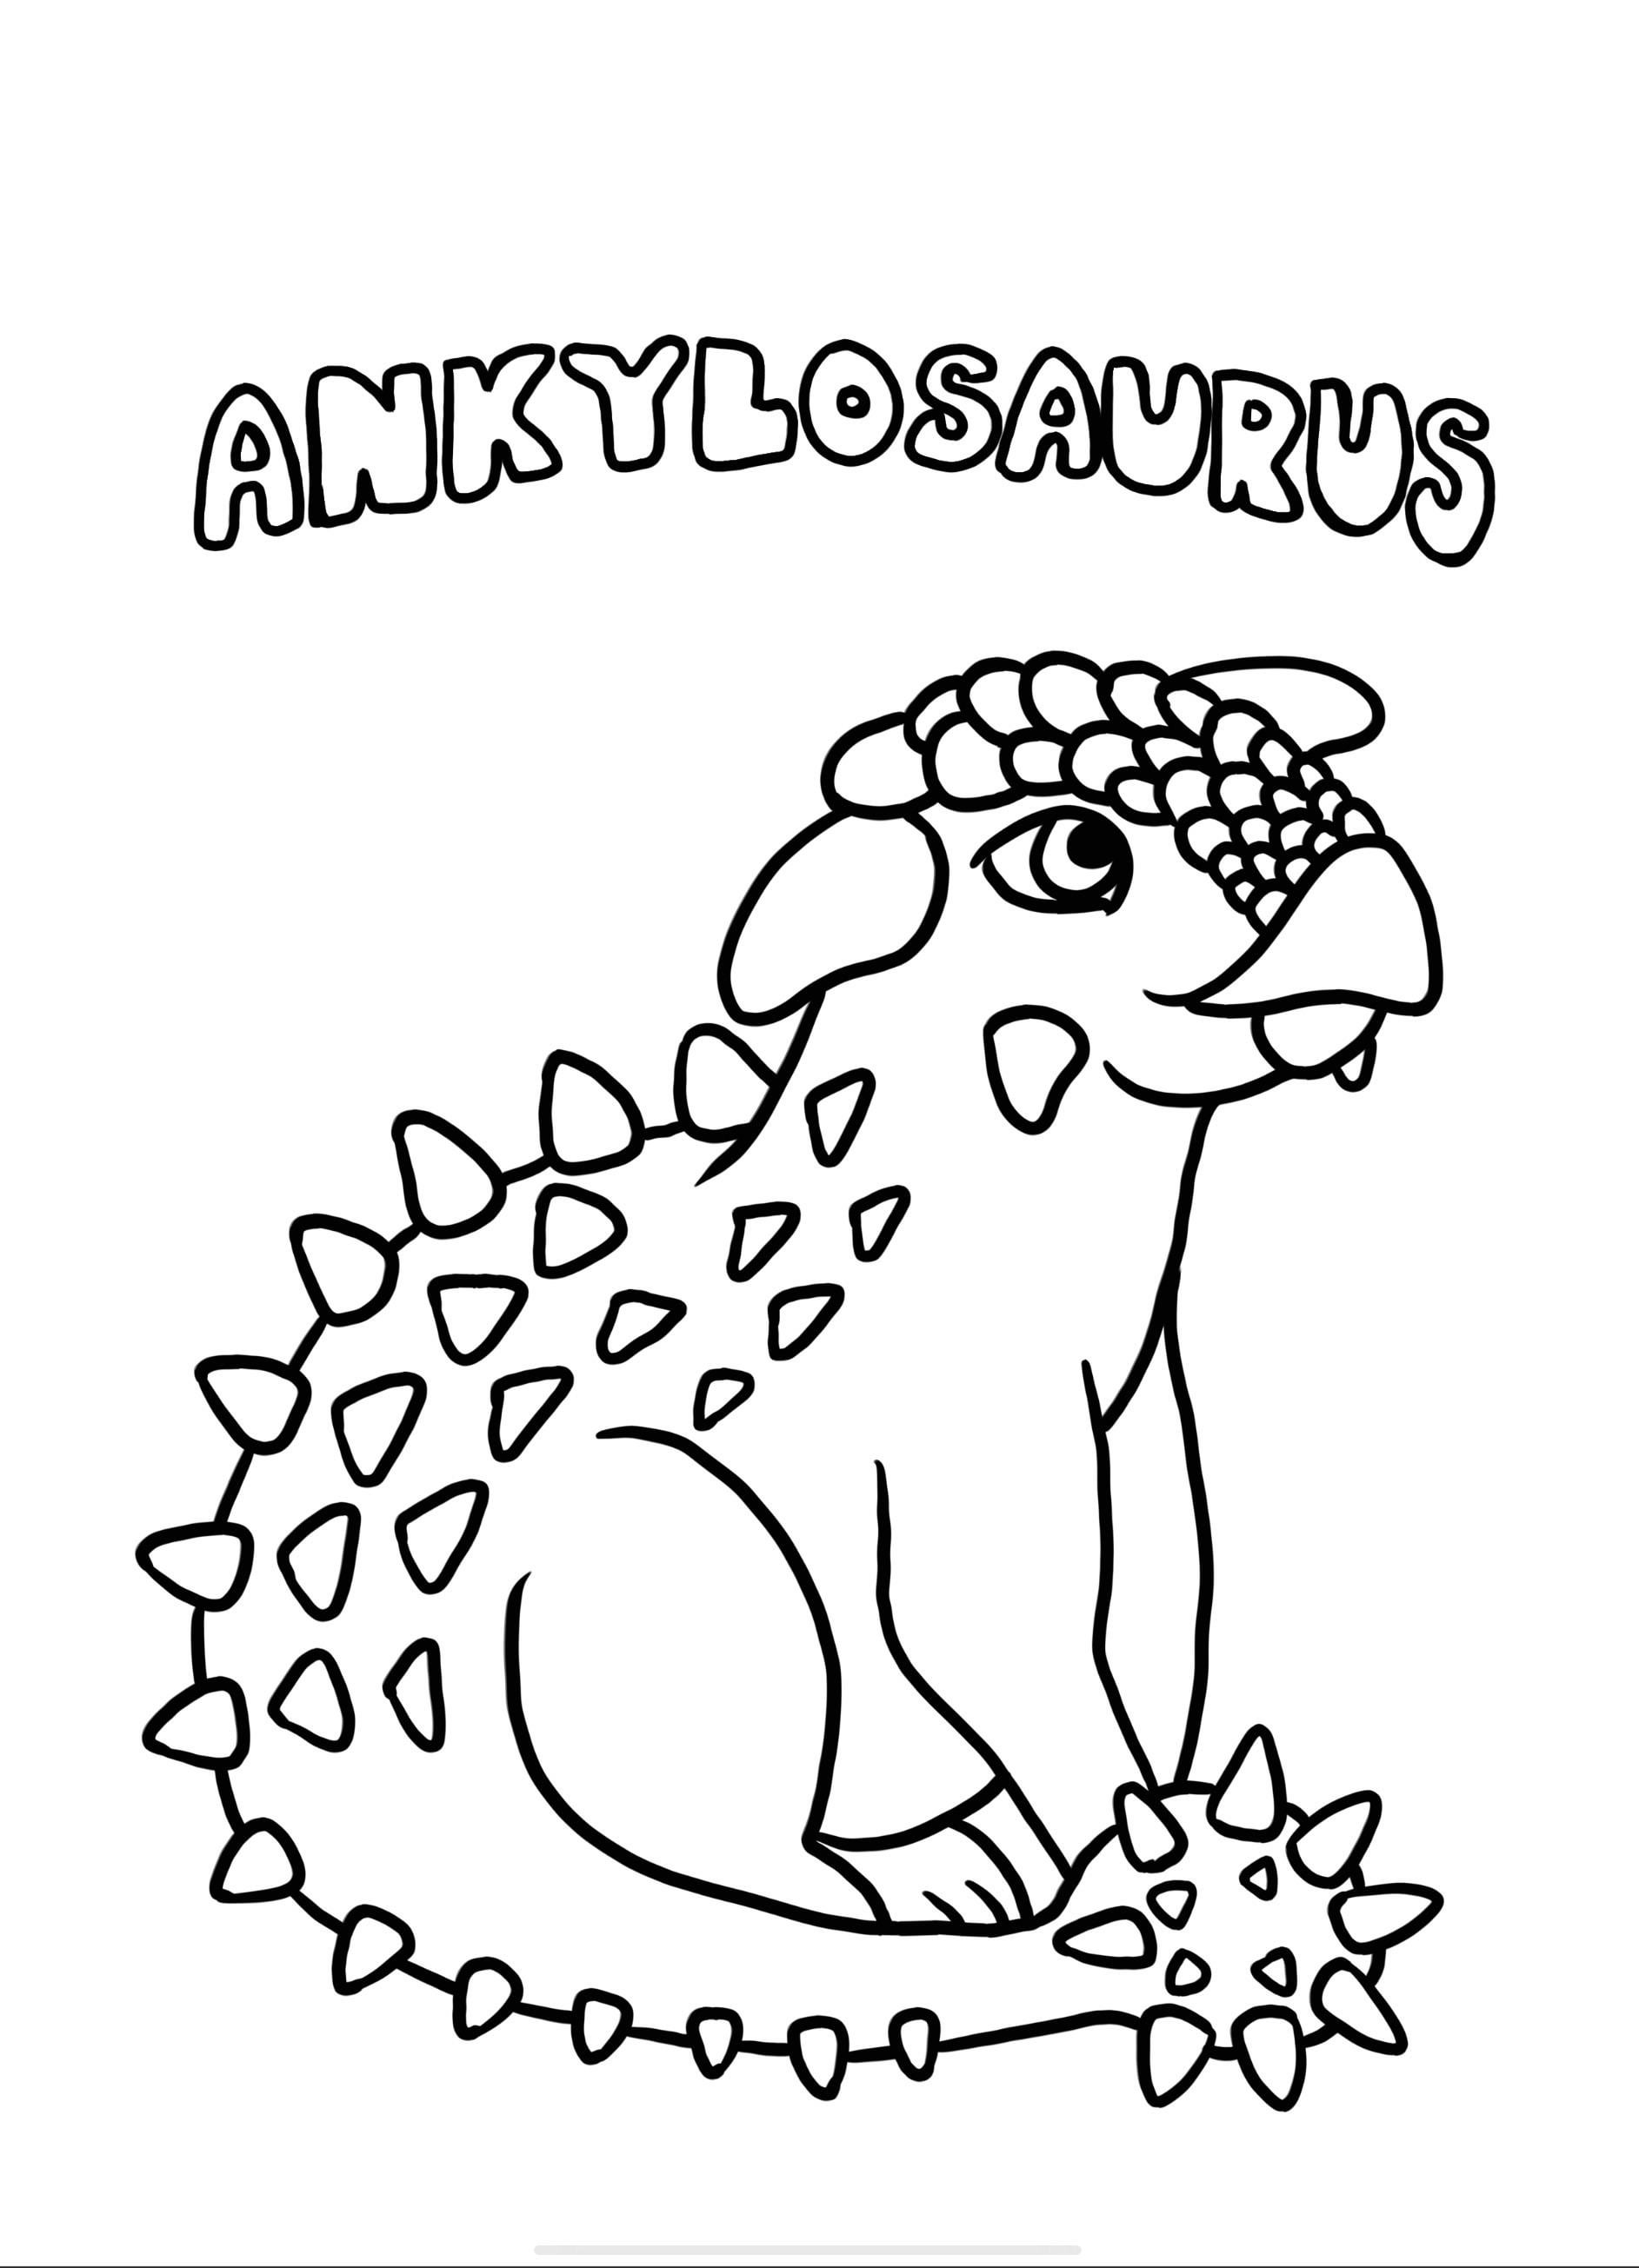 Im making some cute cartoon dinosaur colouring pages for kids heres my first an ankylosaurus my favourite dinosaur any tipssuggestions r dinosaurs